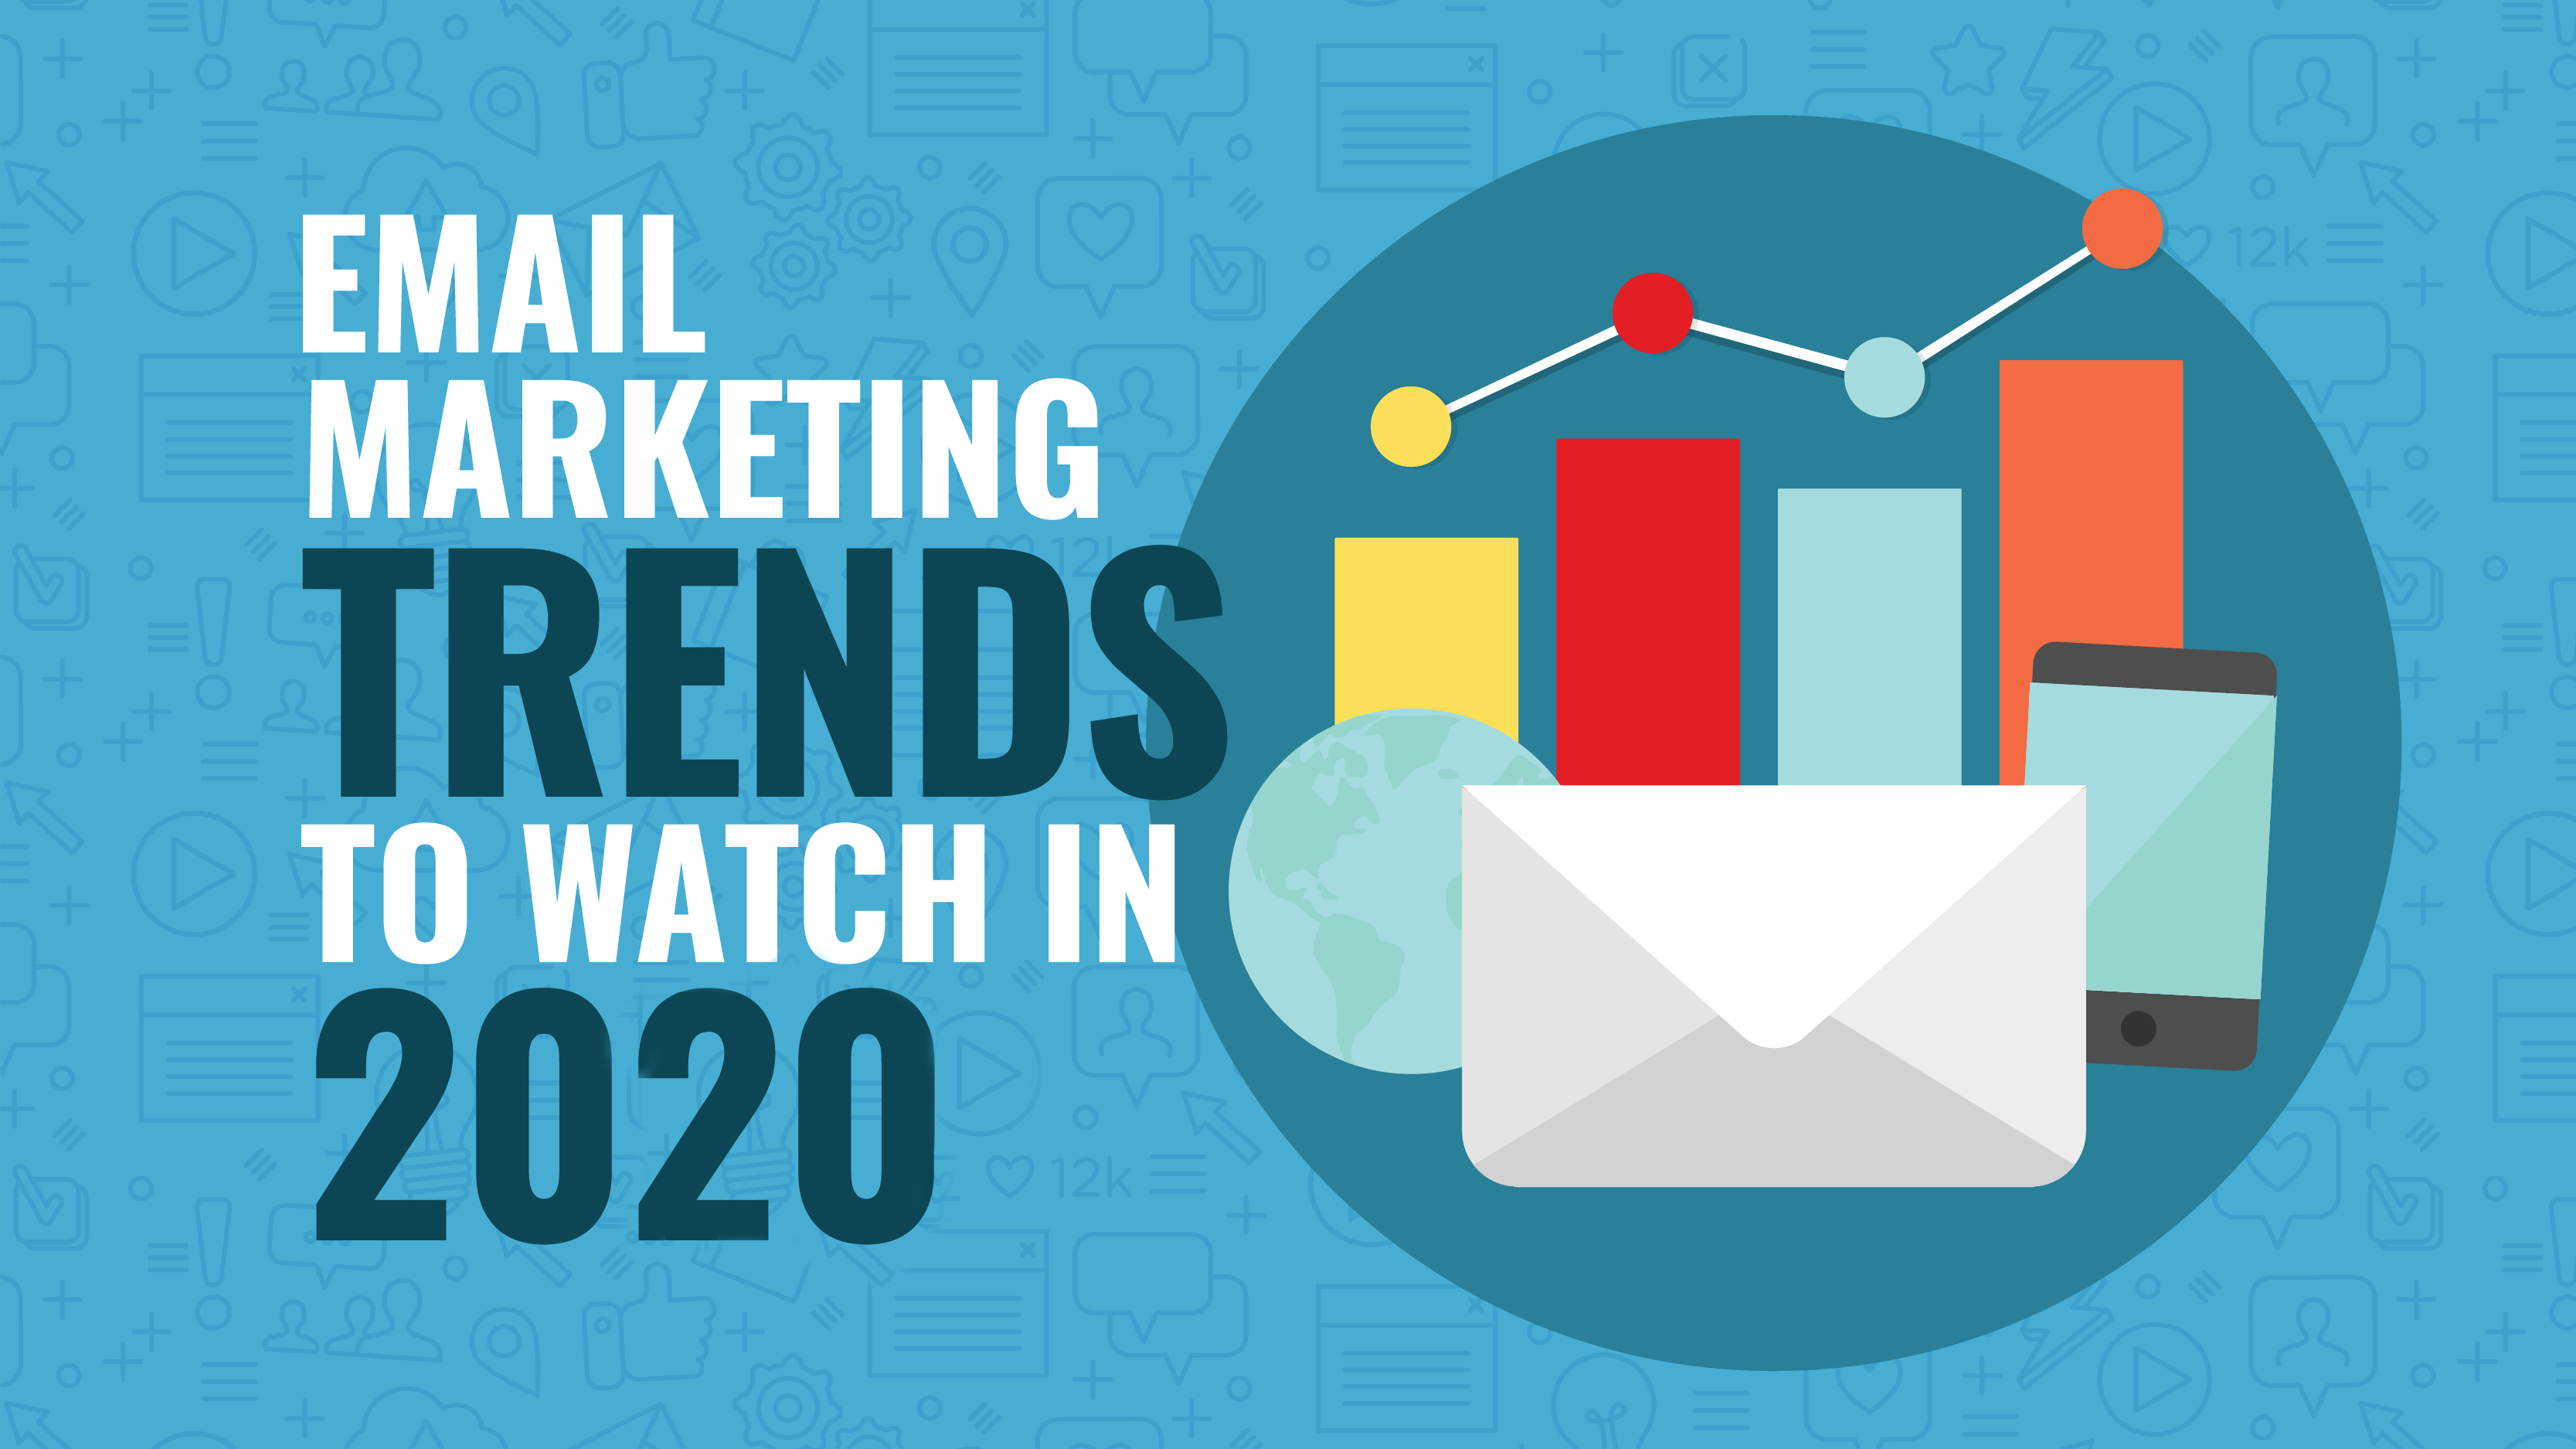 Email Marketing Trends To Watch In